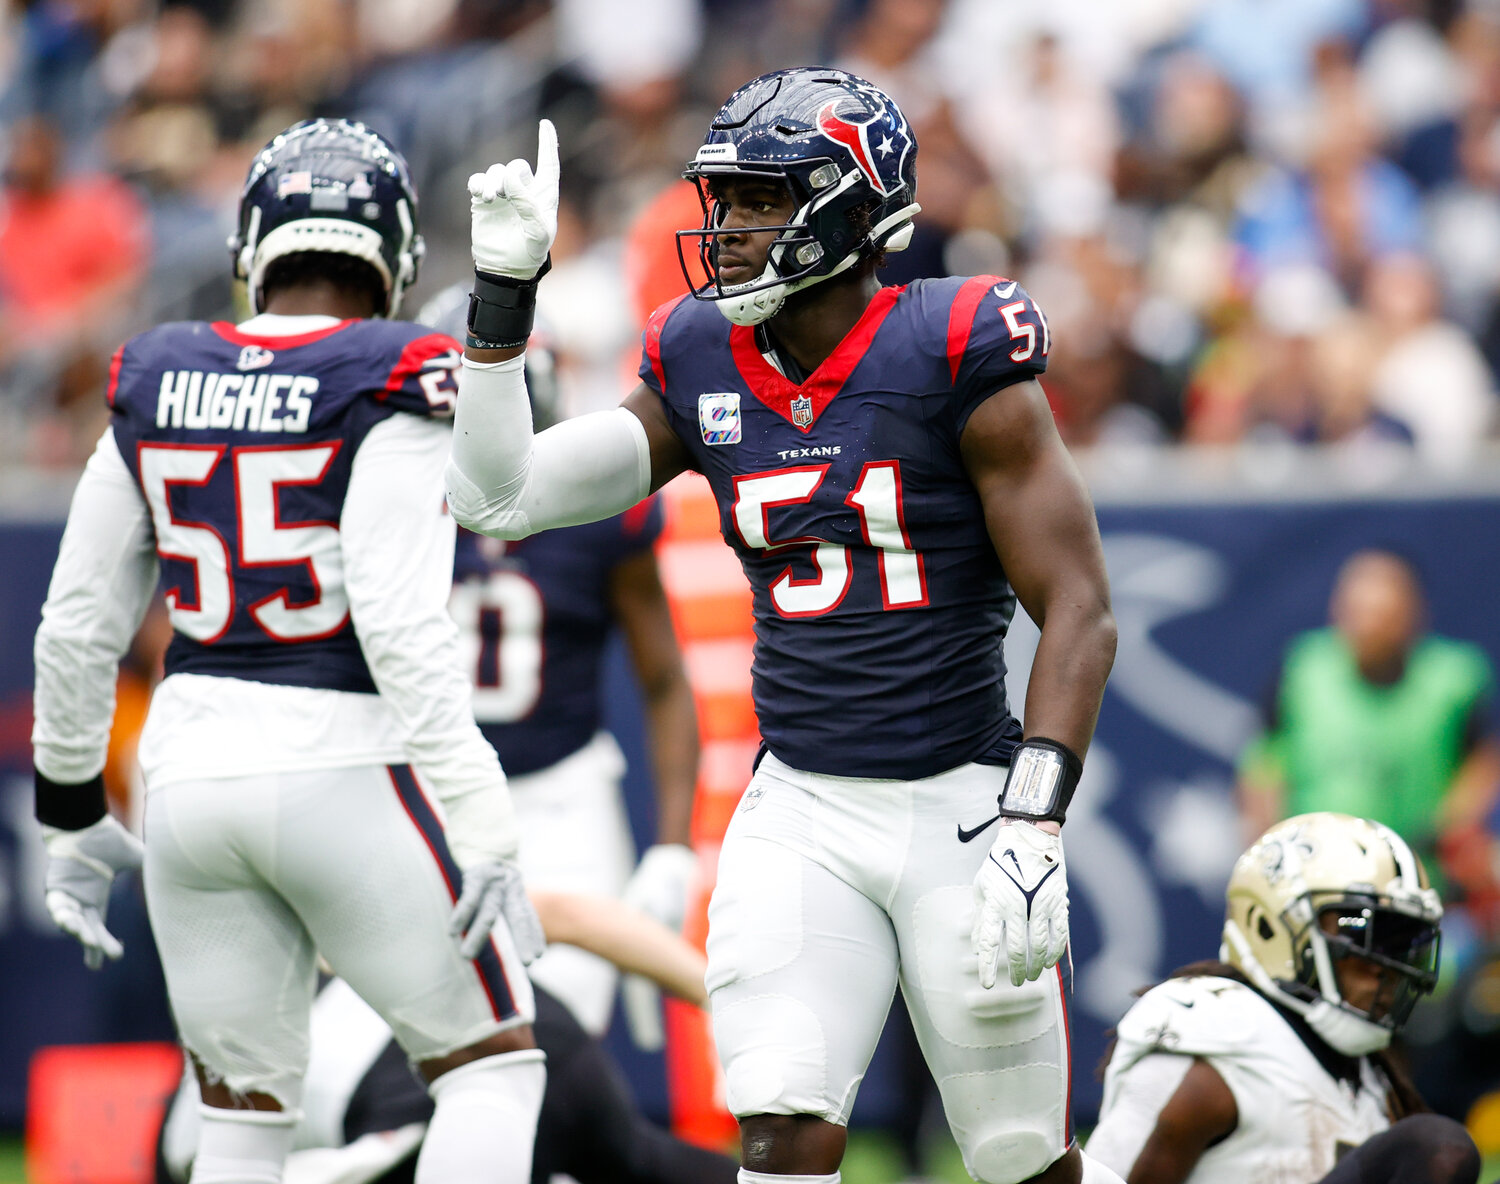 Texans defensive end Will Anderson Jr. (51) gestures after making a tackle for loss during an NFL game between the Texans and the Saints on October 15, 2023 in Houston. The Texans won, 20-13.